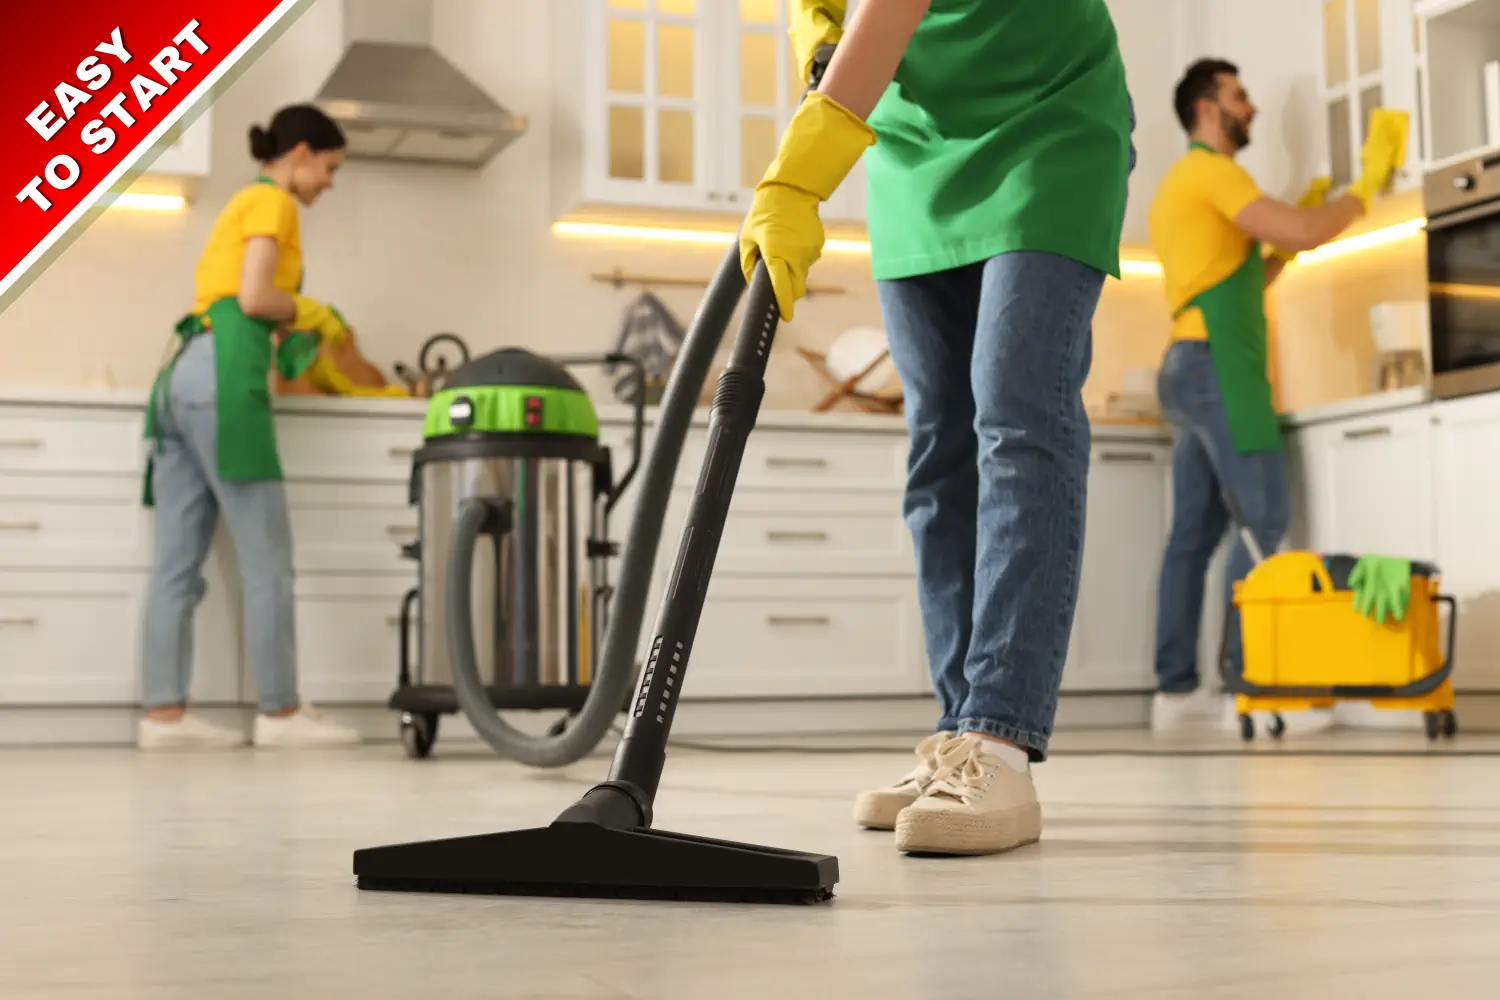 An image showing professional cleaners working, one using a hoover in the foreground.